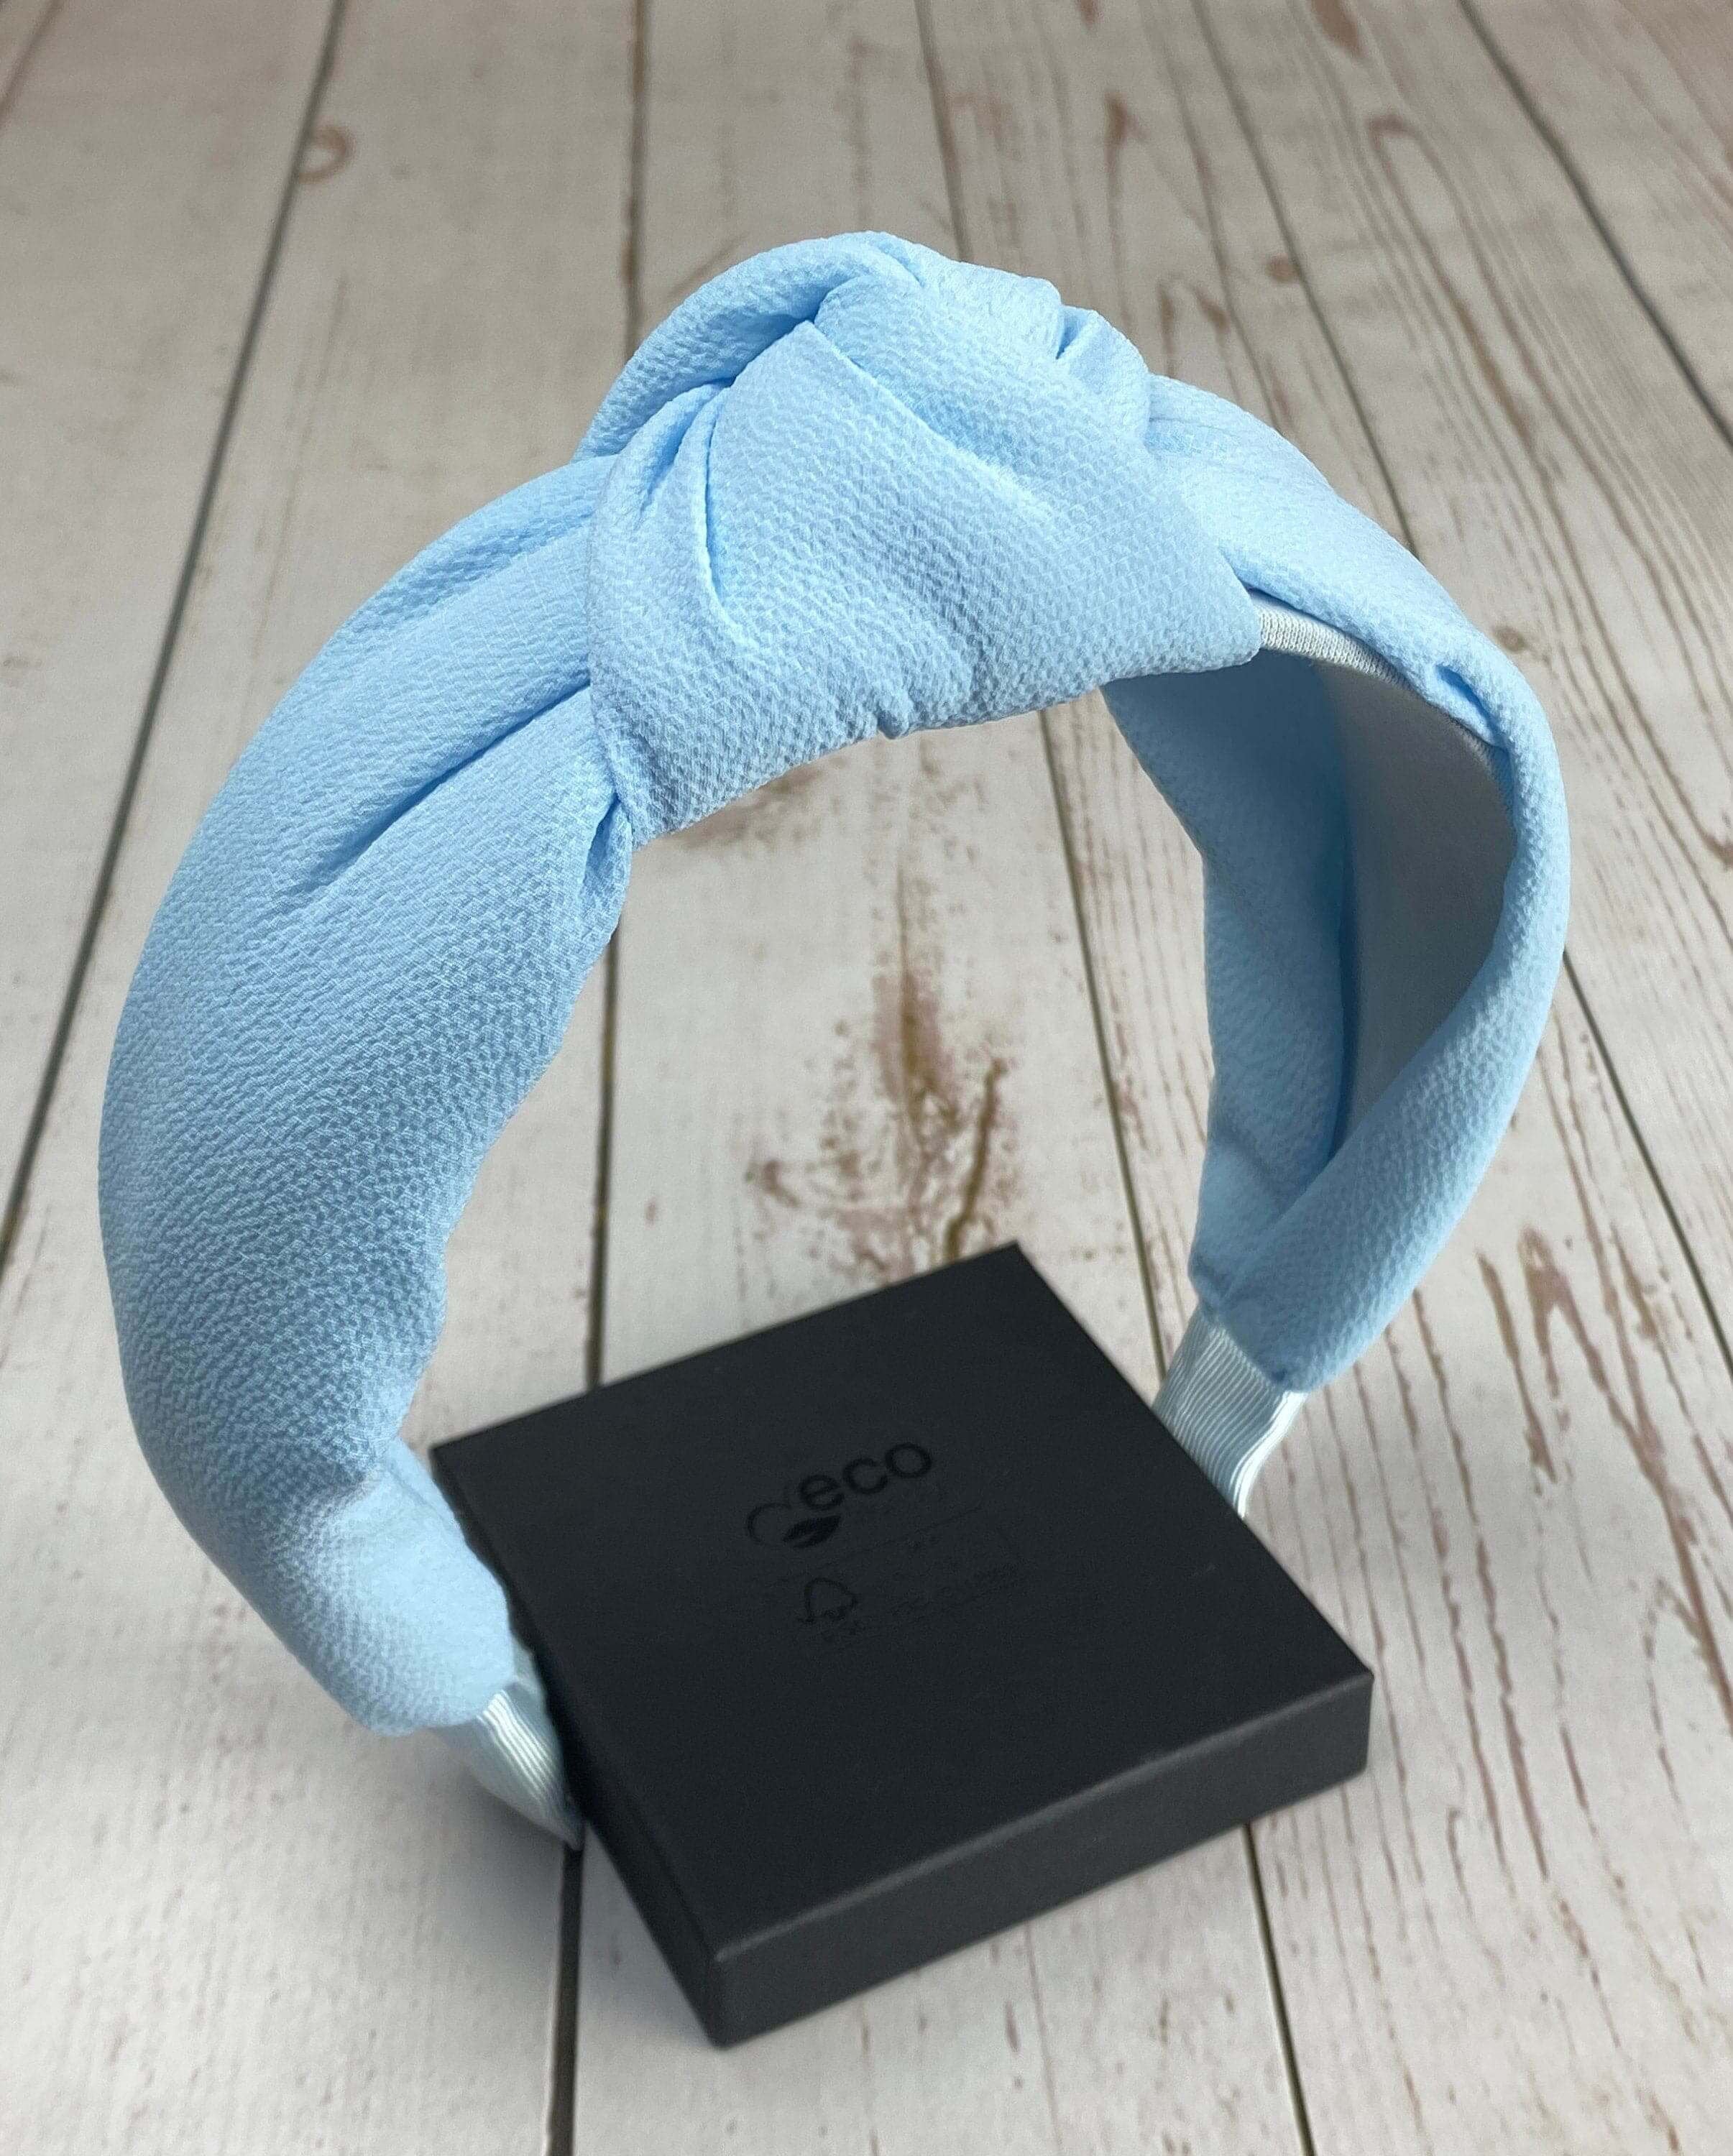 Experience ultimate comfort and style with this light blue, viscose crepe padded headband, designed with a classic knot twist.